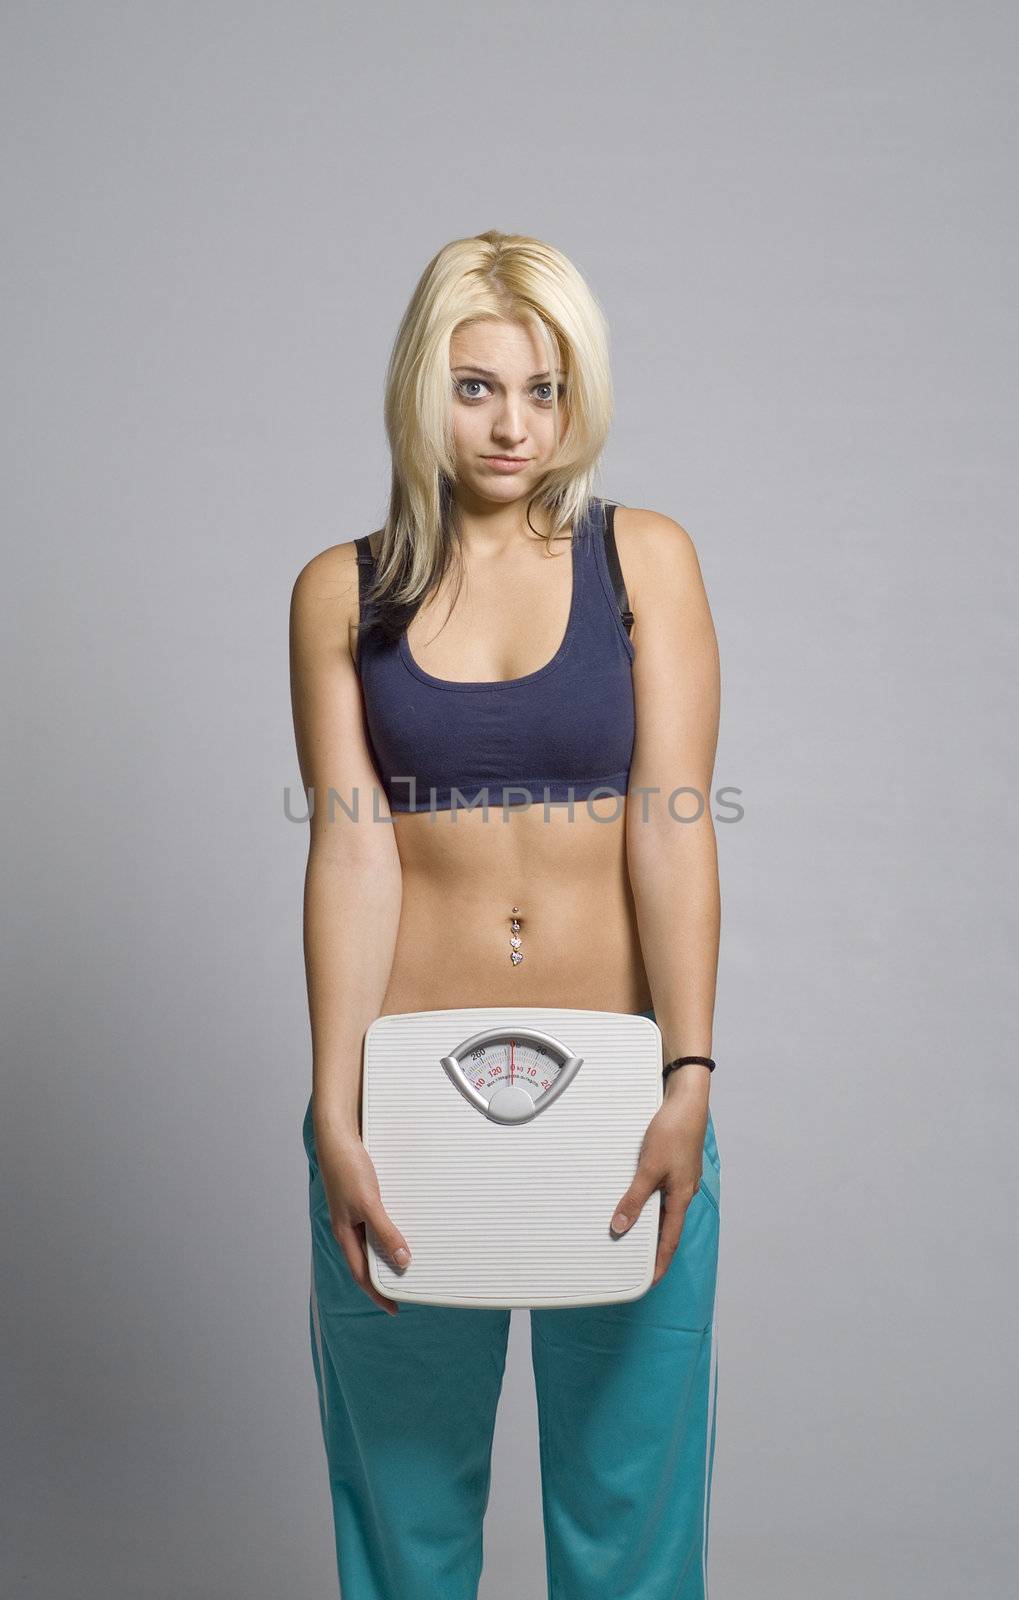 Sad woman unhappy or depressed with weight slimming scale